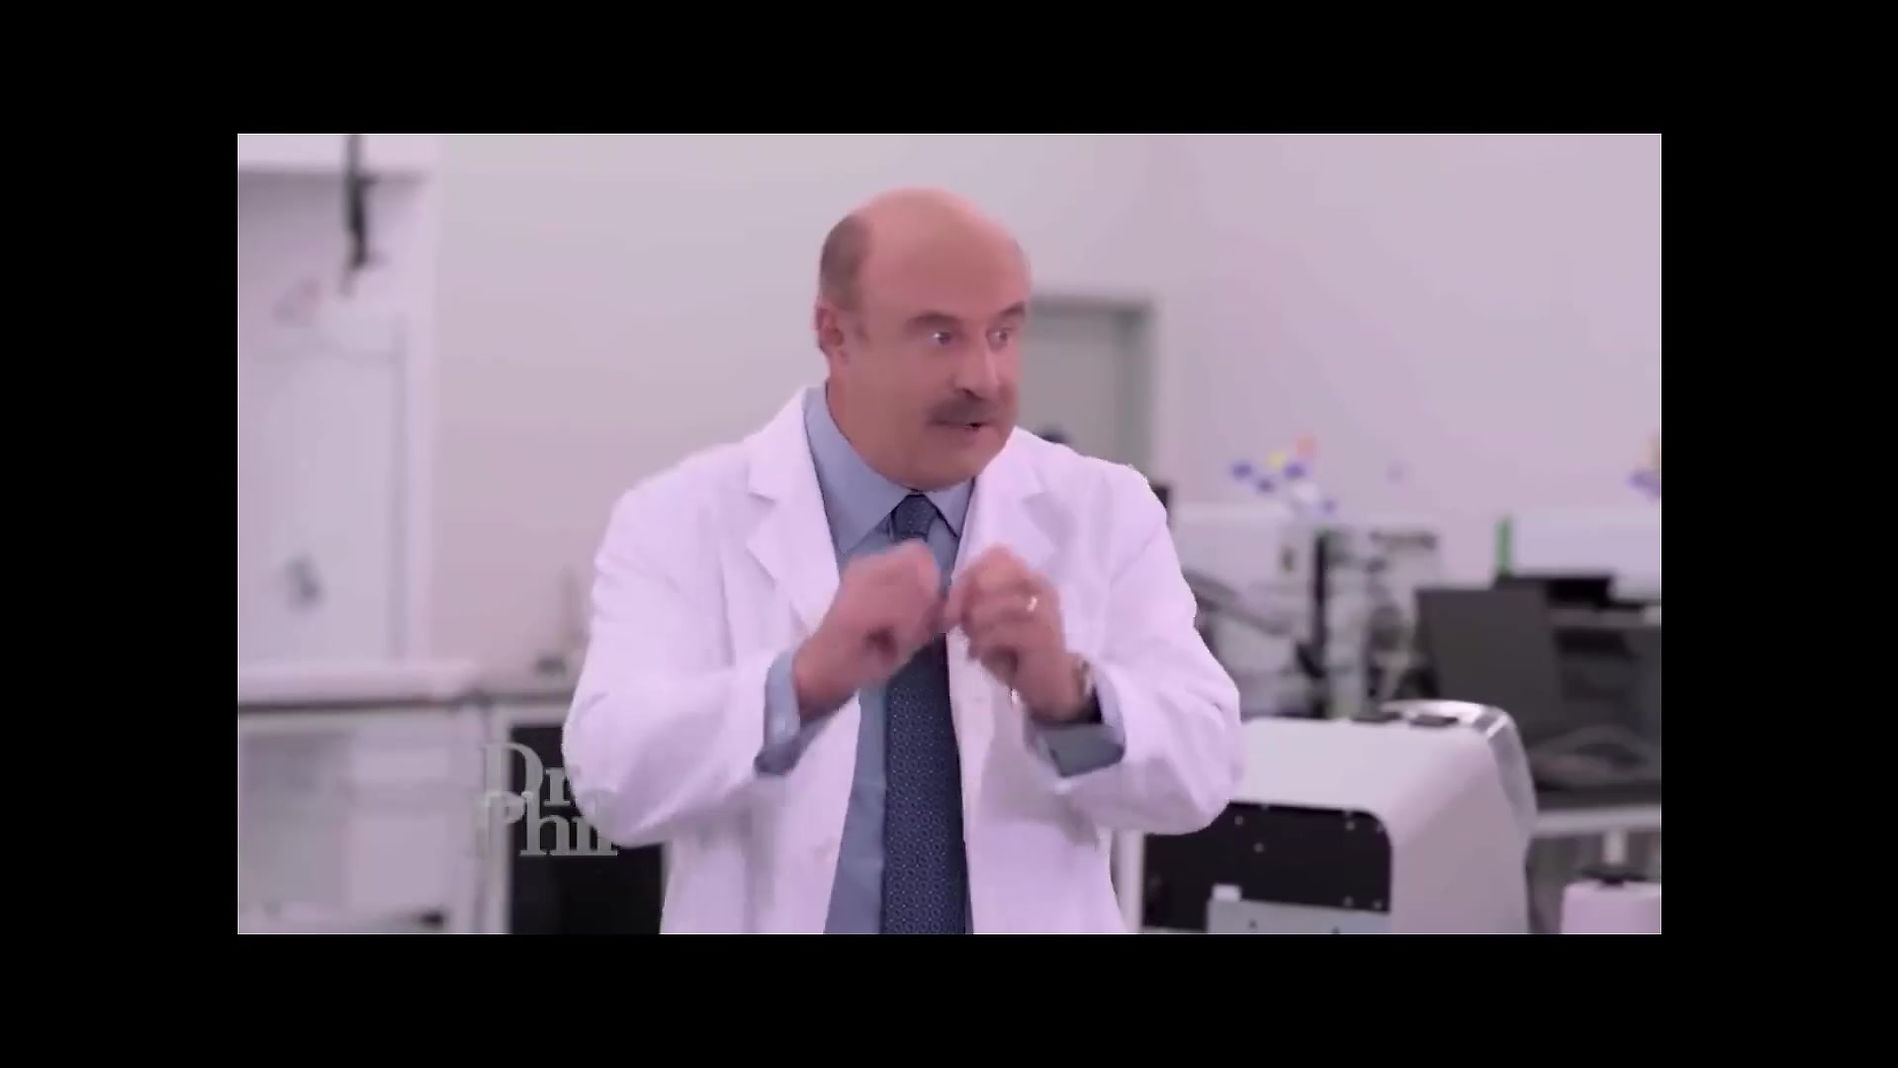 Dr. Phil and Dr. Oz Video